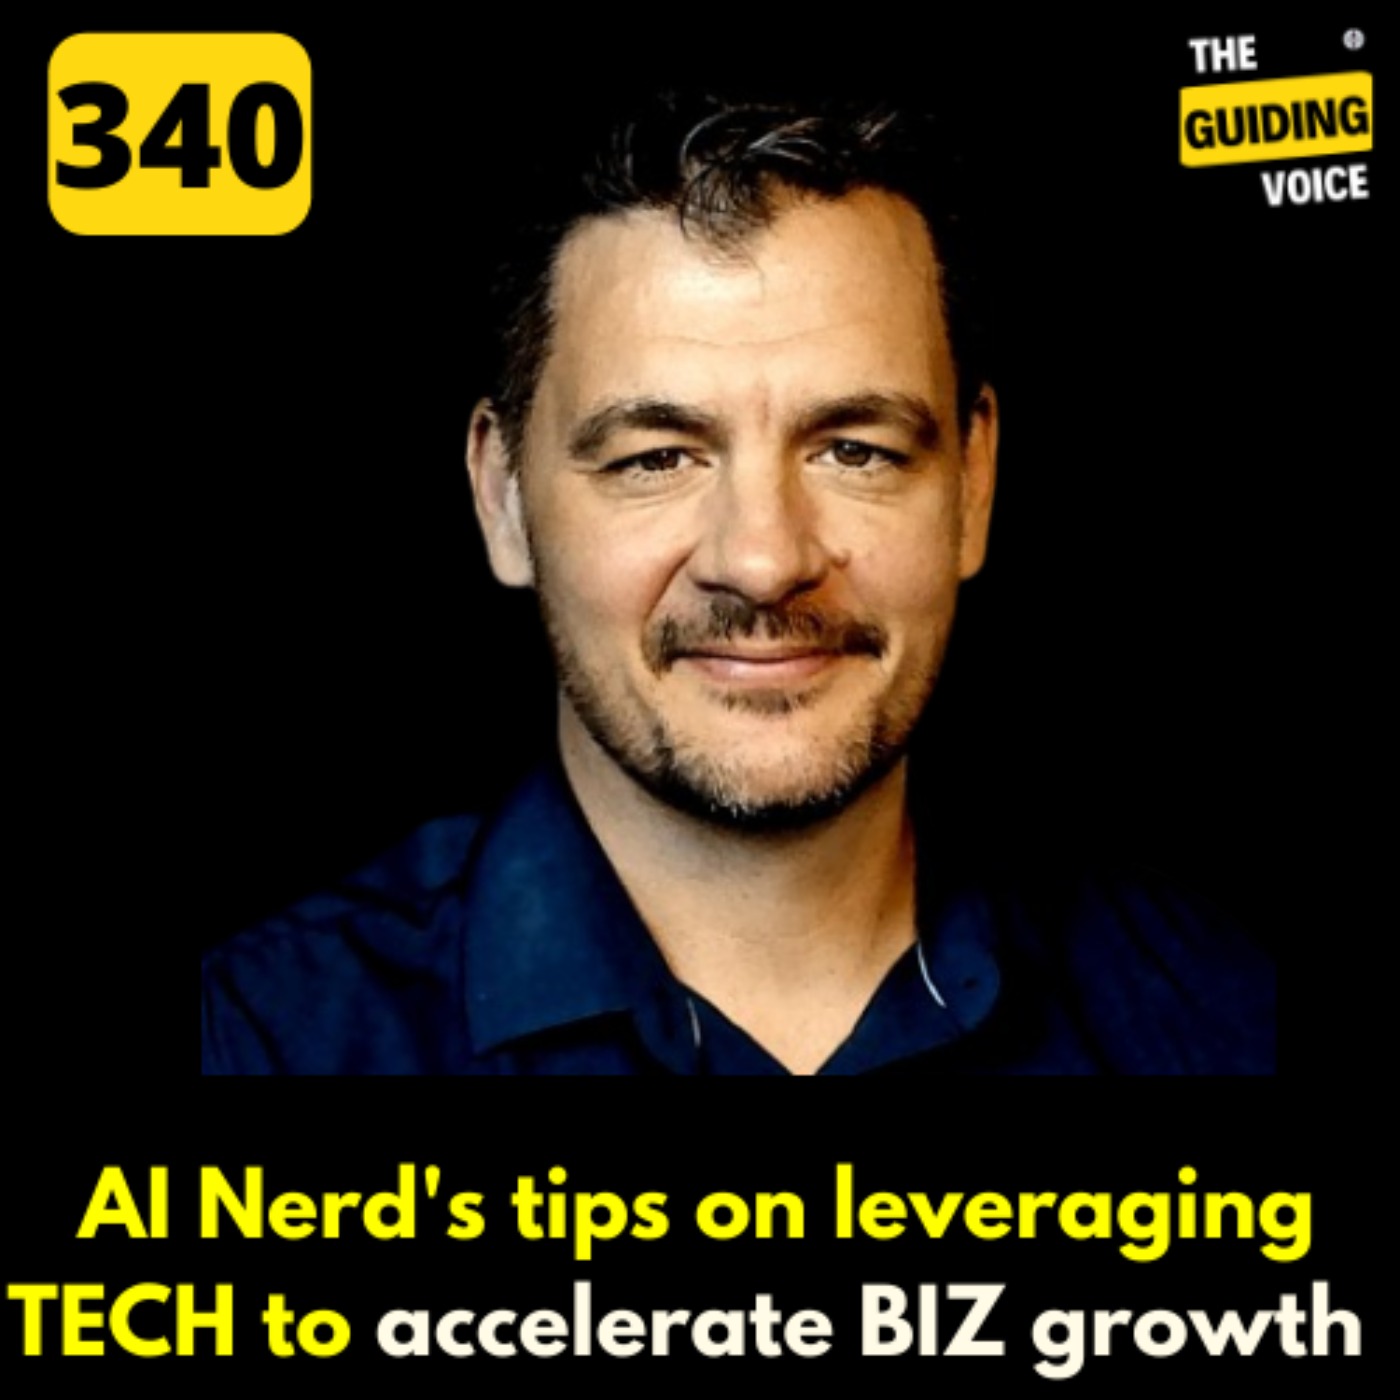 AI Nerd’s tips on how to leverage technology to accelerate business growth | Thomas Helfrich | TGV340